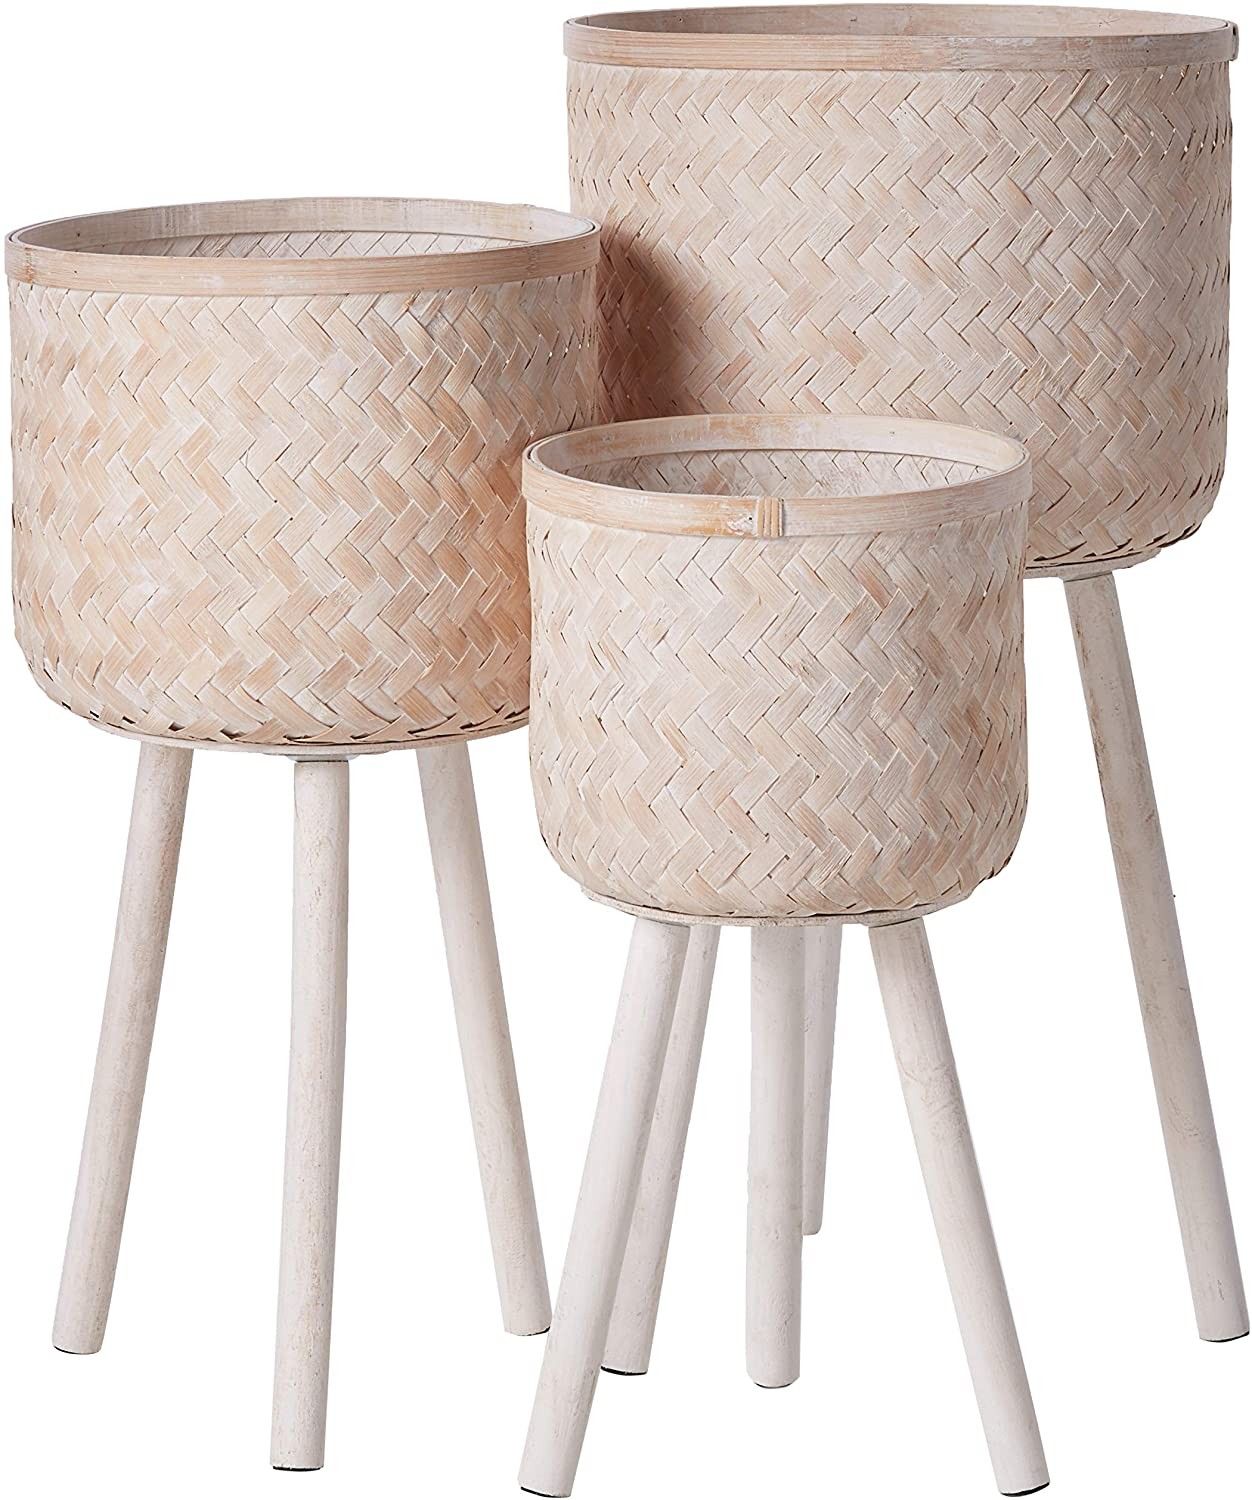 Bloomingville Set of 3 Round Bamboo Floor Baskets with Wood Legs, Brown | Amazon (US)